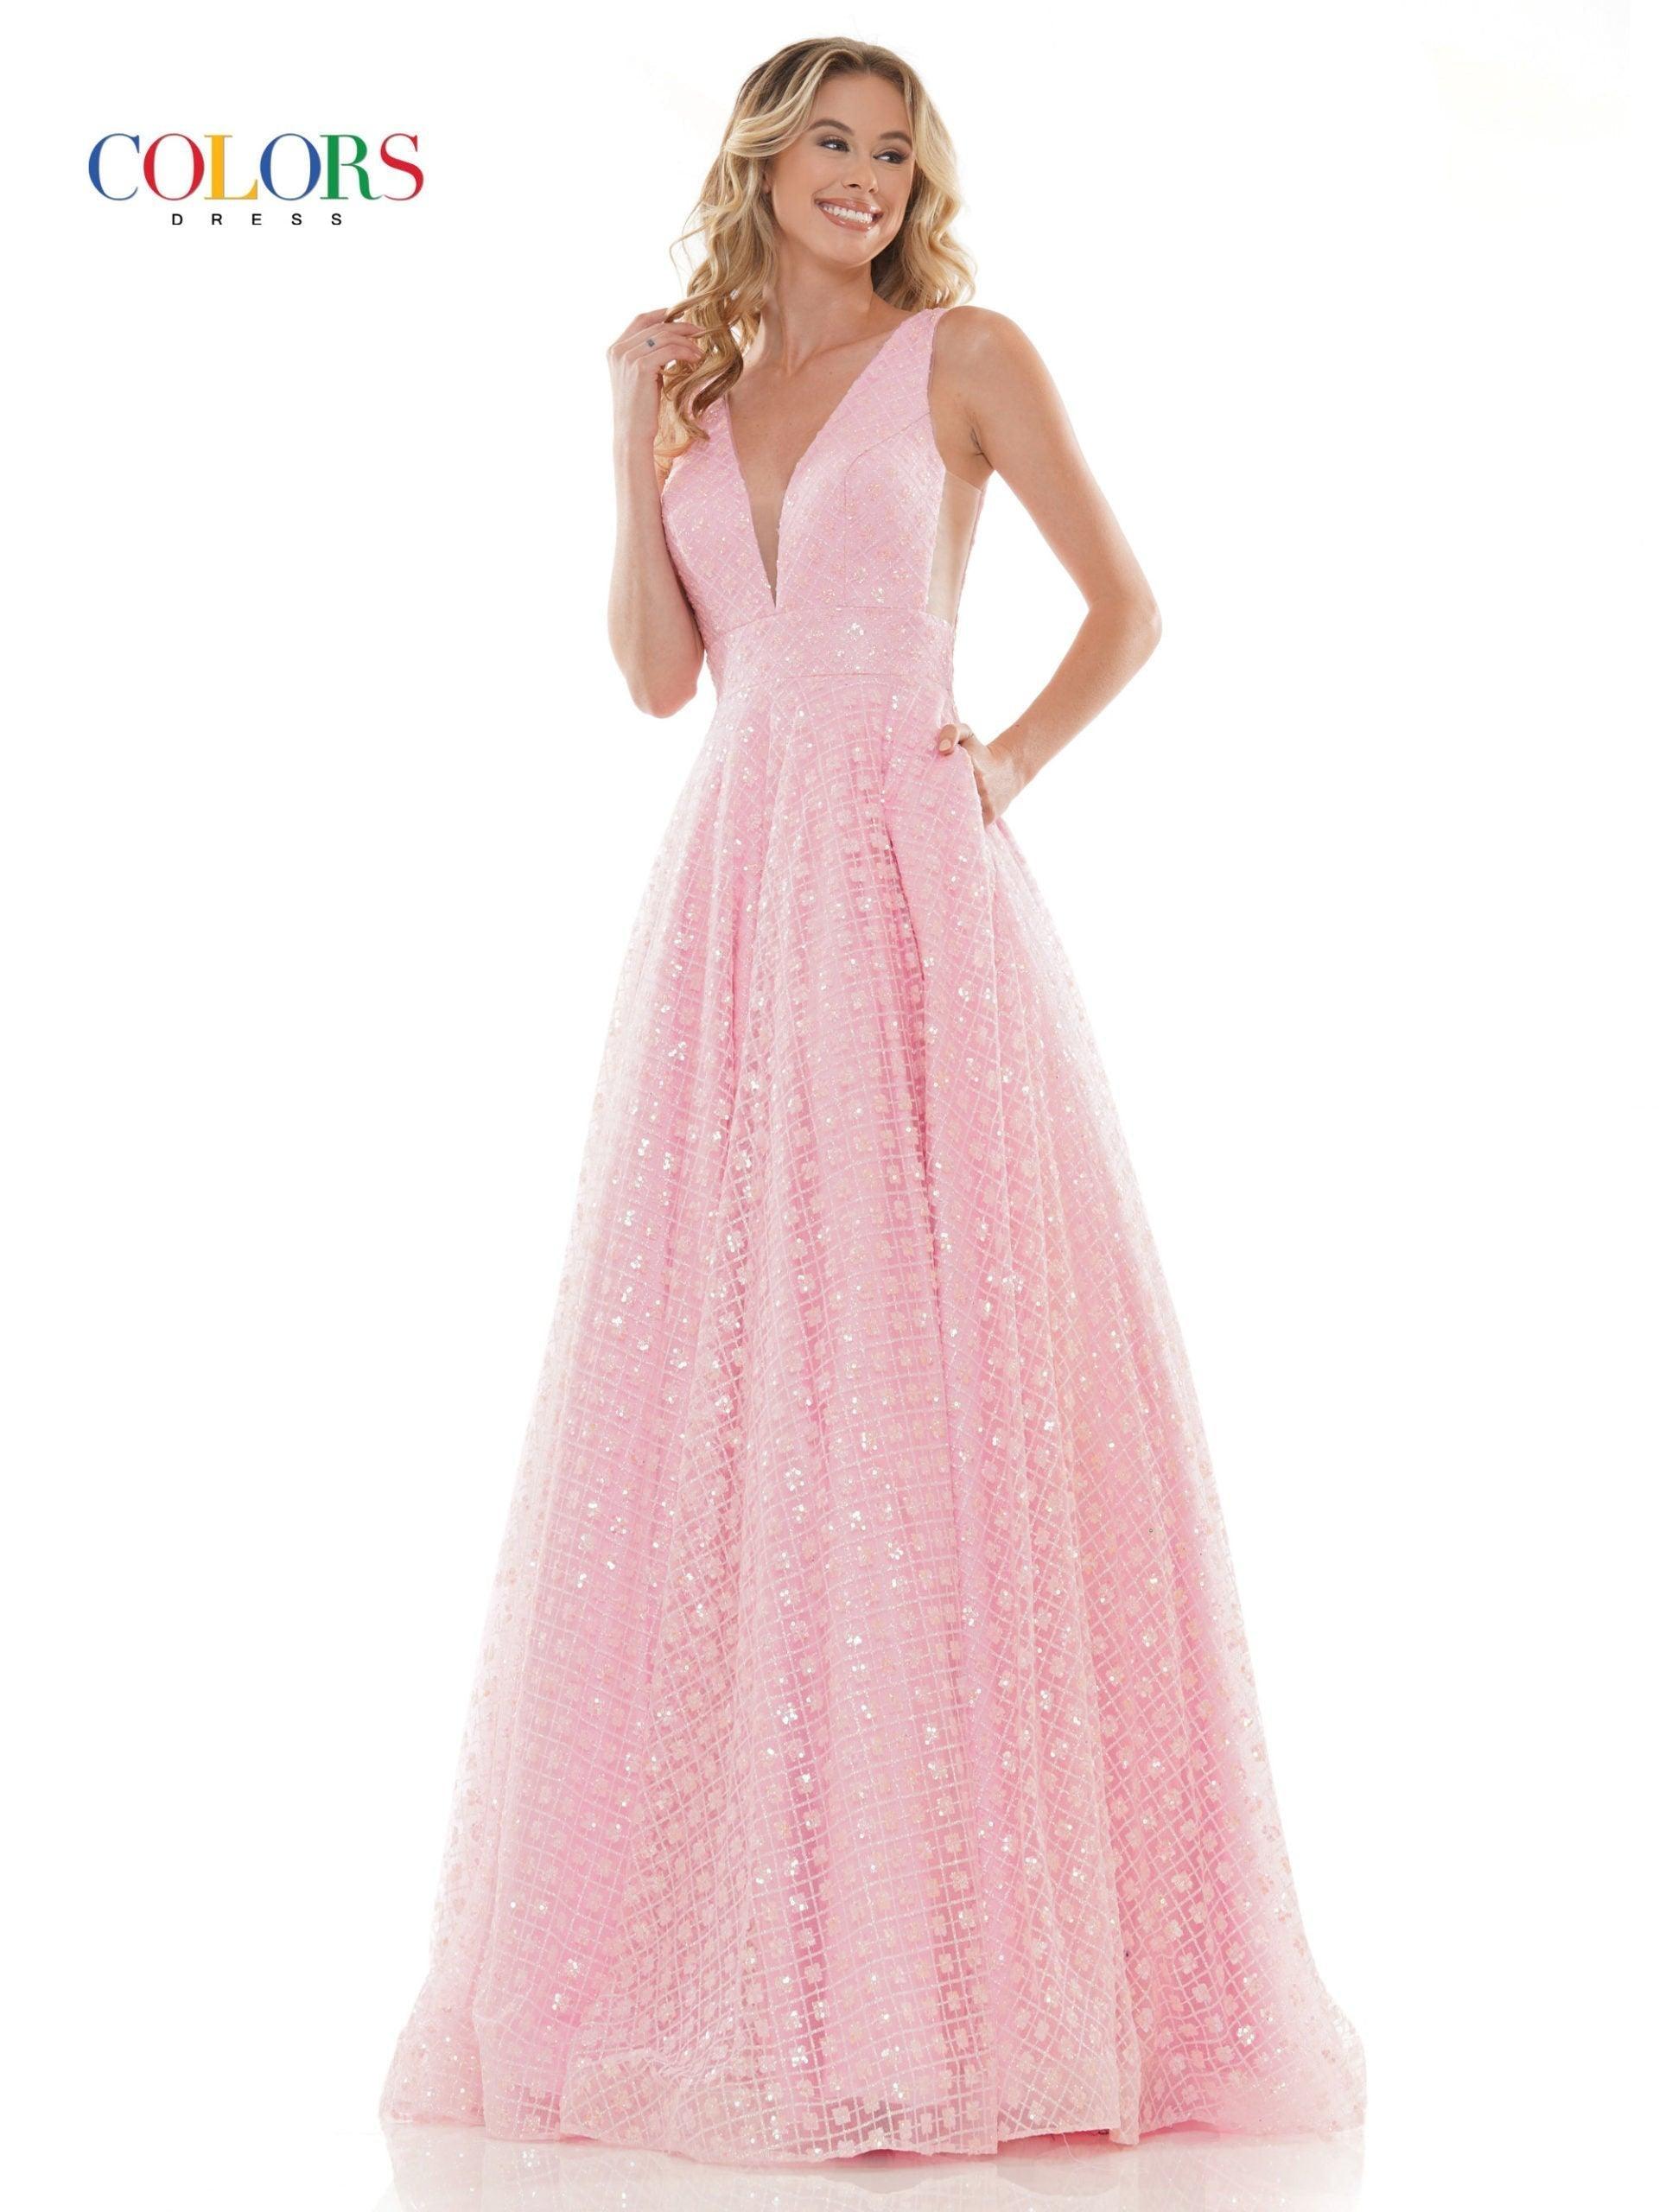 2170 Colors Prom Long Glitter Ball Gown Sale - The Dress Outlet